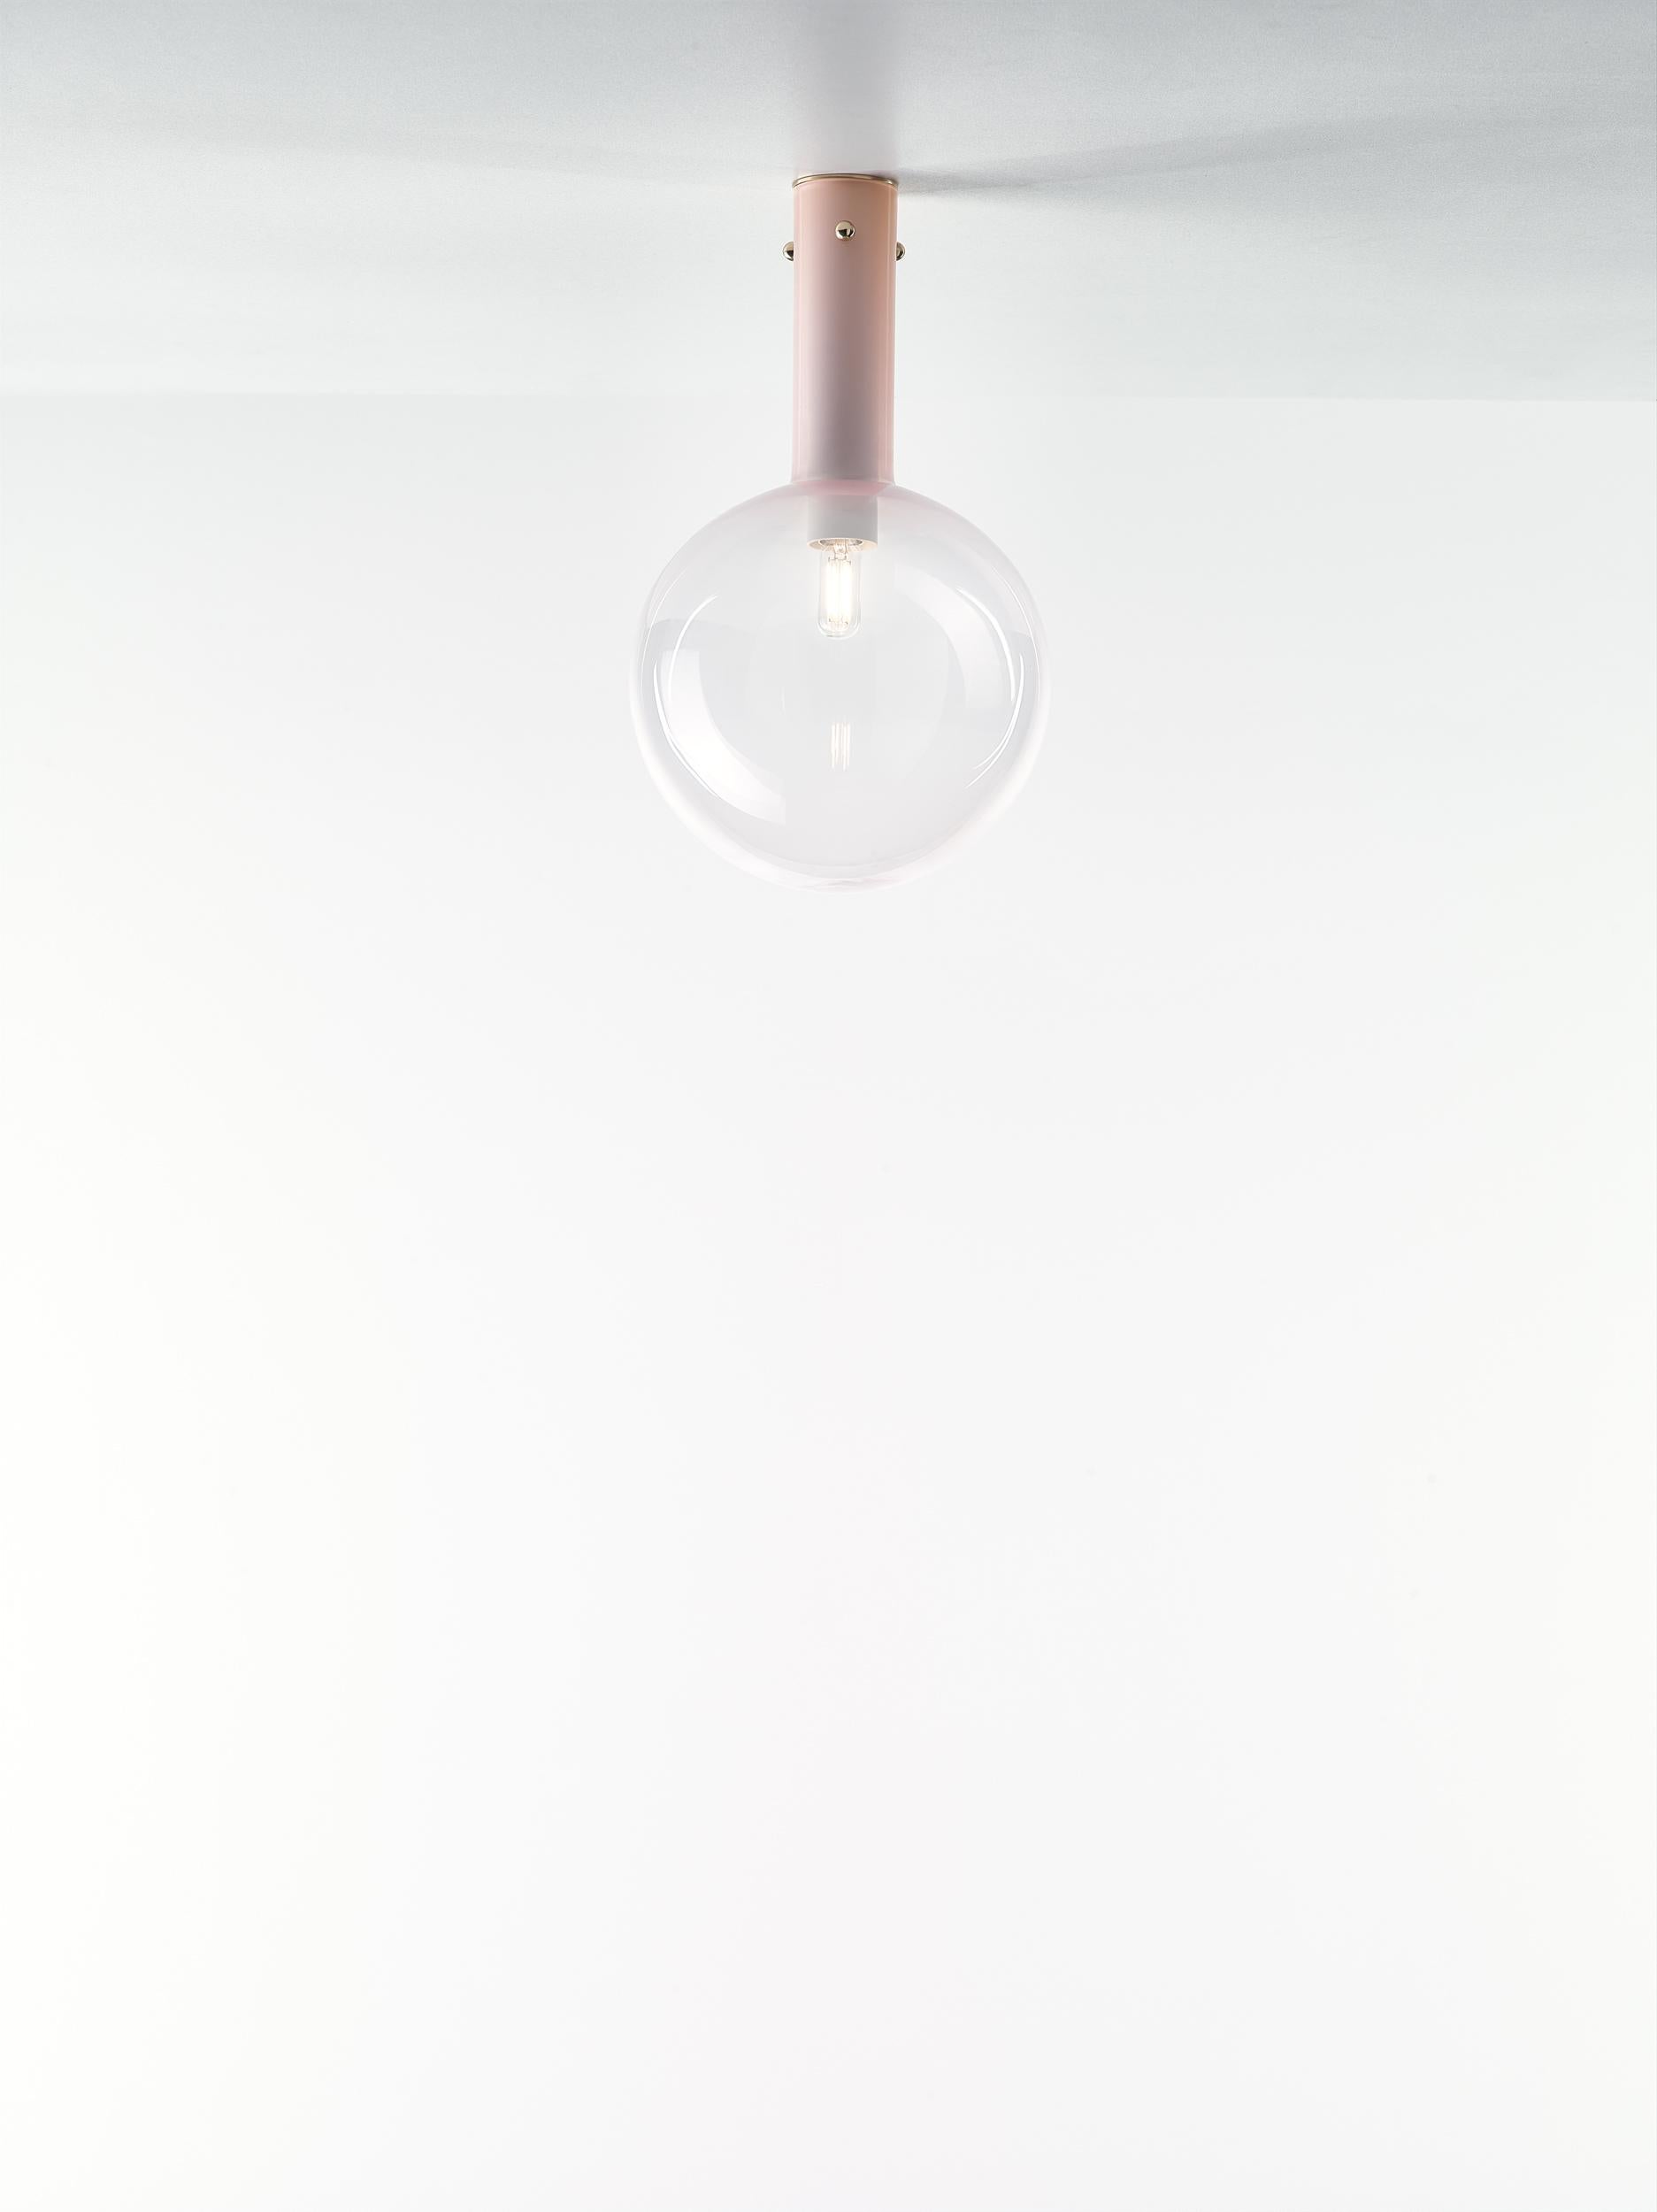 Set of 2 pink Sphaerae surface lights by Dechem Studio
Dimensions: D 20 x H 180 cm
Materials: brass, metal, glass.
Also available: different finishes and colors available.

Only one homogenous piece of hand blown glass creates the main body of